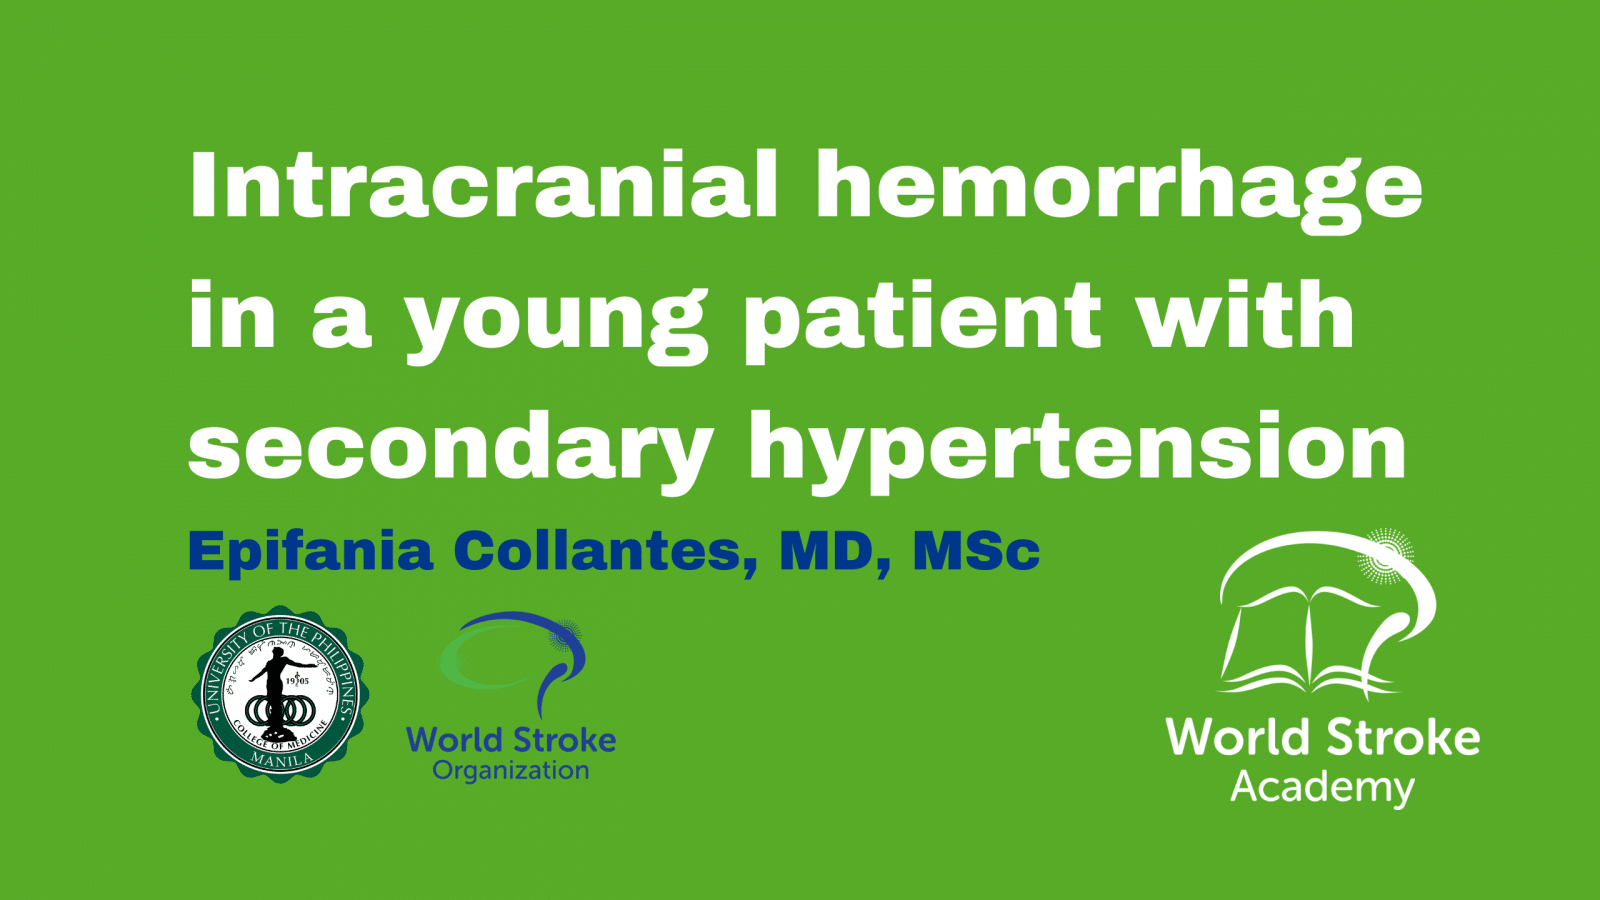 Case Study – Intracranial hemorrhage in a young patient with secondary hypertension